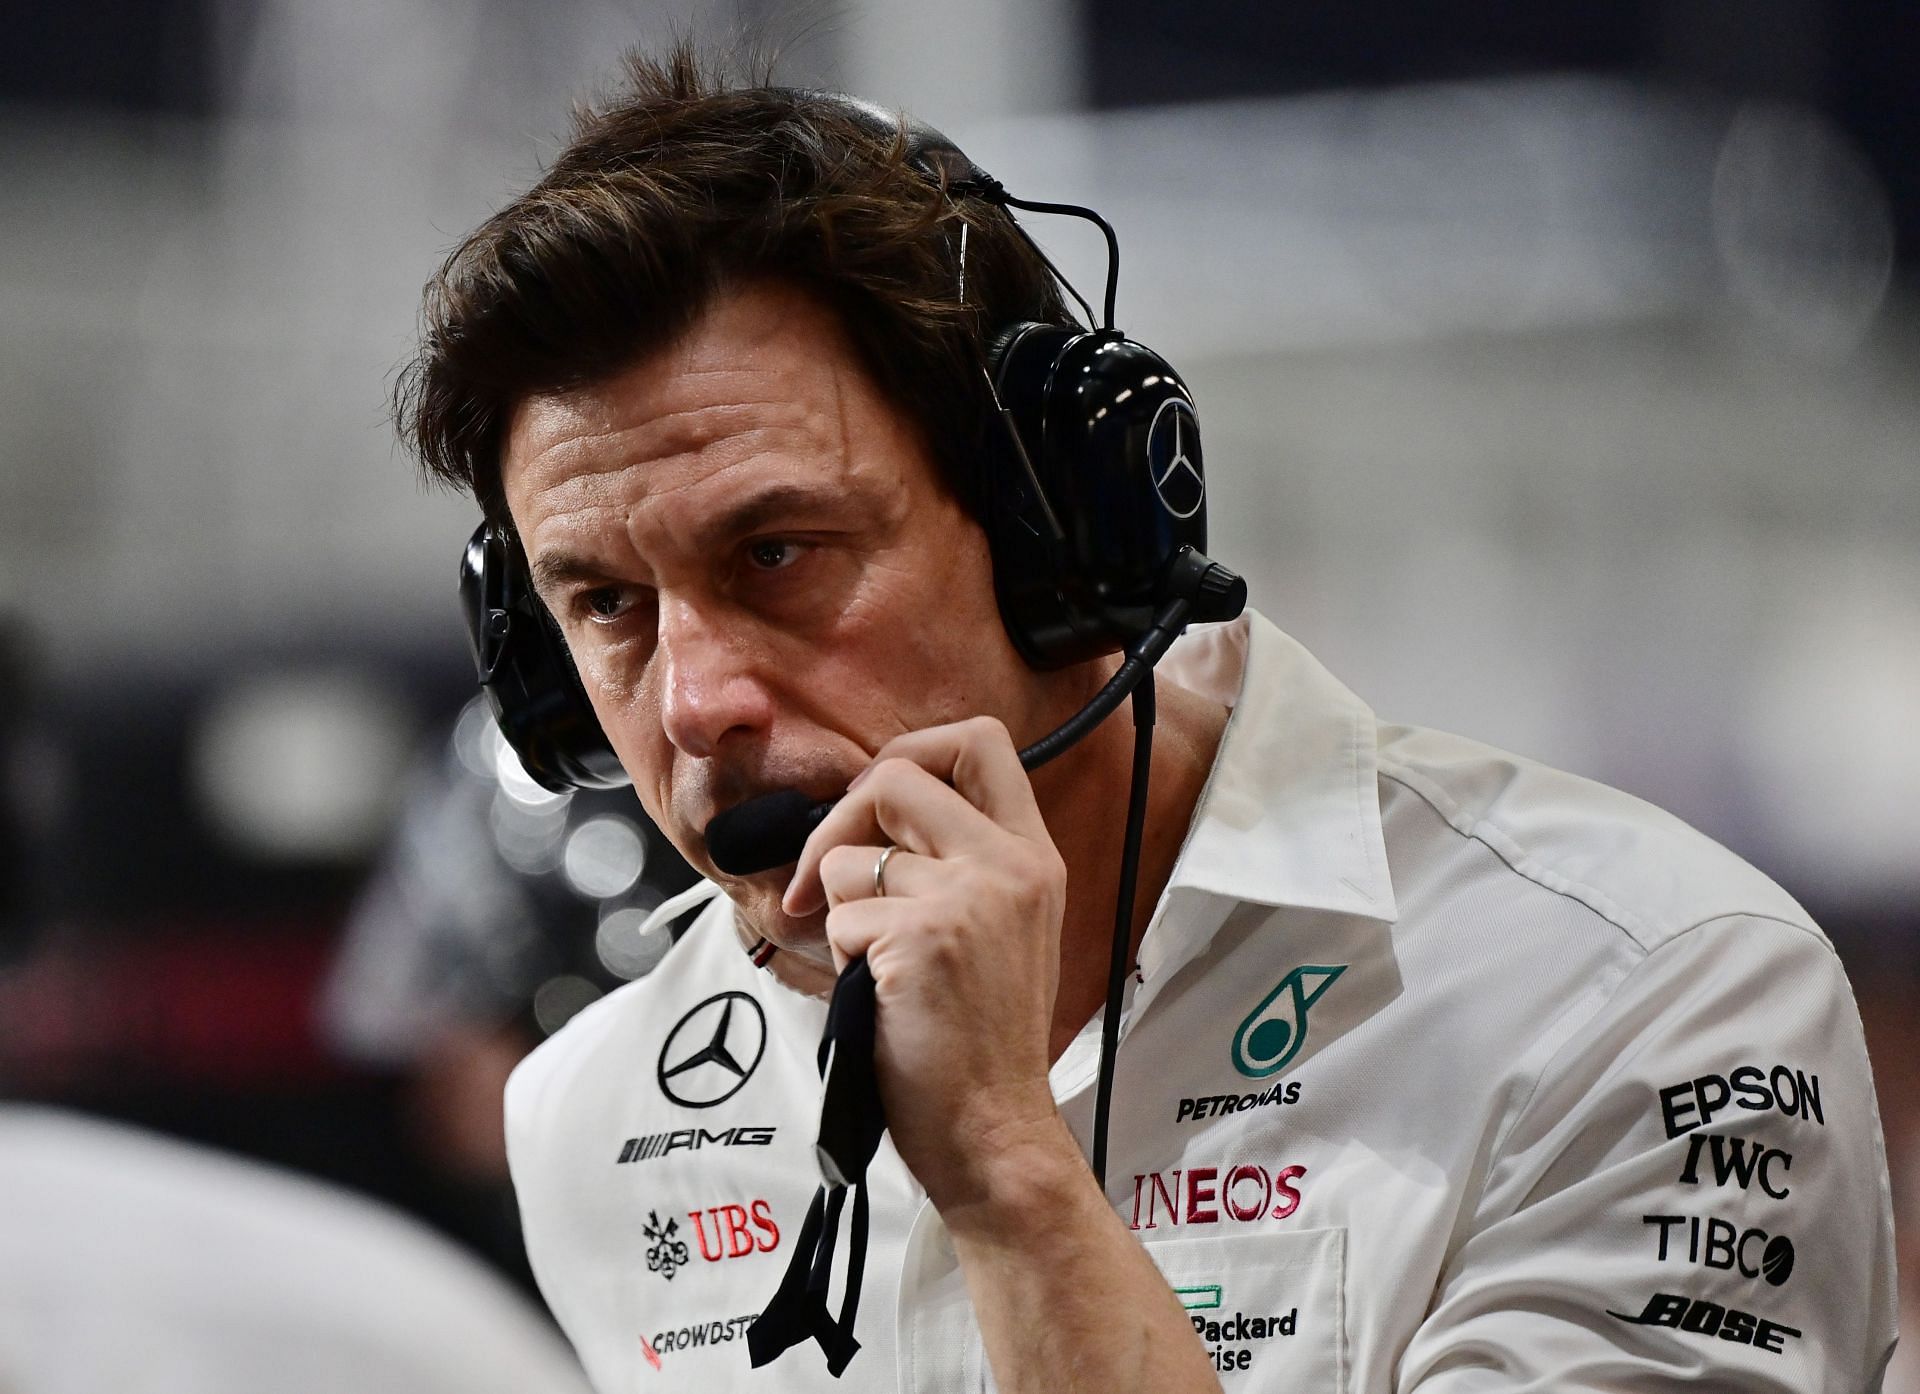 Mercedes boss Toto Wolff broke his BOSE headset at the Saudi Arabian Grand Prix (Photo by Andrej Isakovic - Pool/Getty Images)